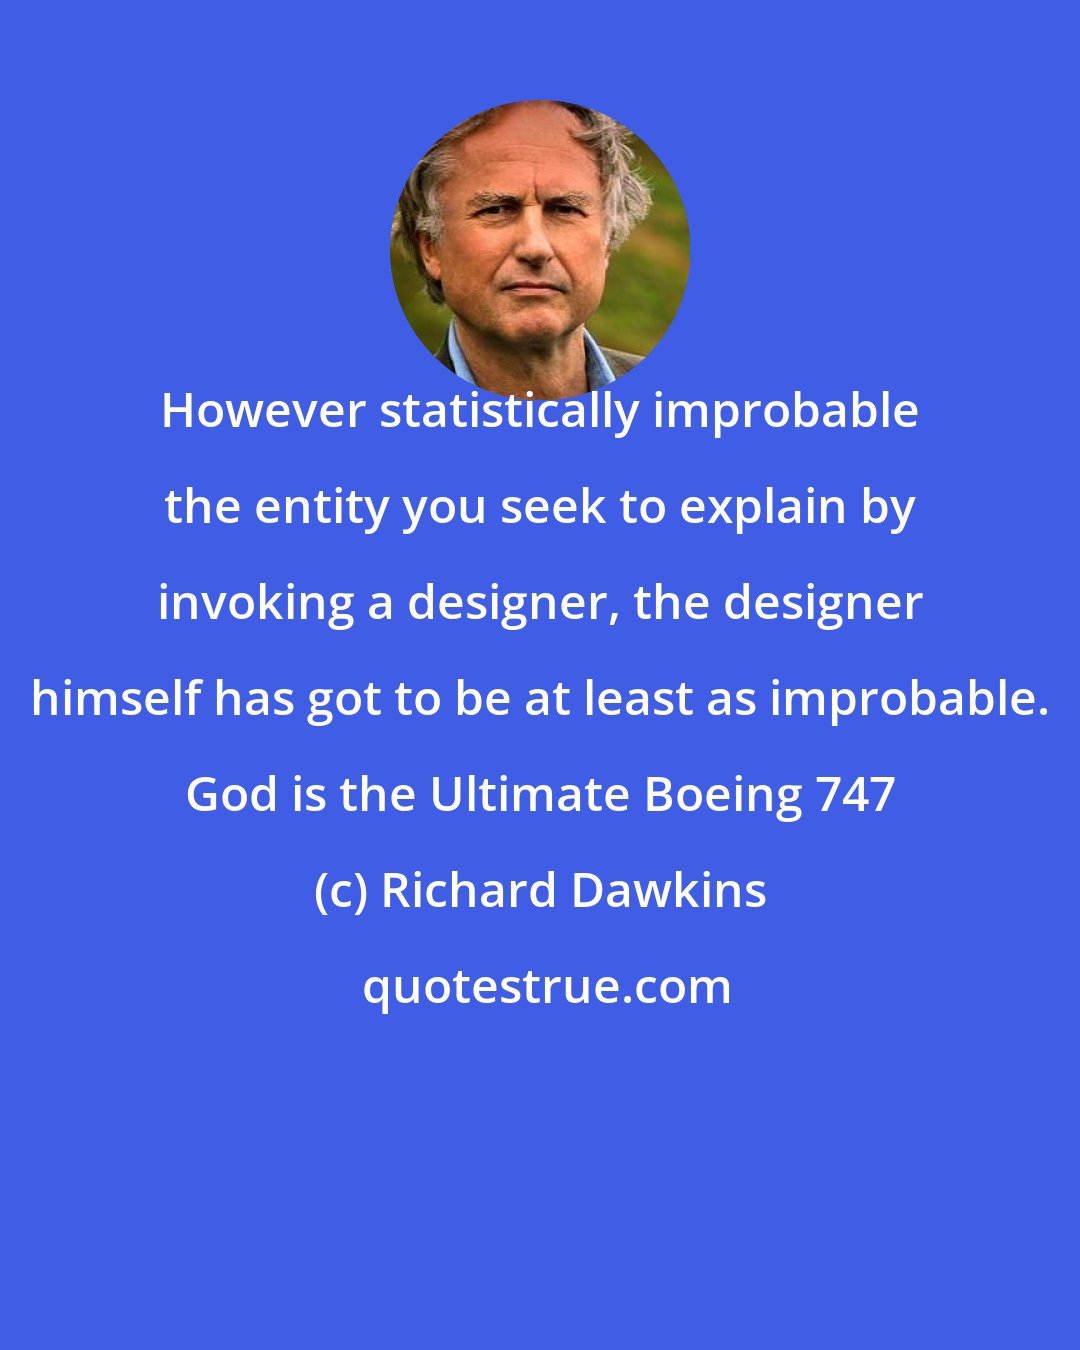 Richard Dawkins: However statistically improbable the entity you seek to explain by invoking a designer, the designer himself has got to be at least as improbable. God is the Ultimate Boeing 747